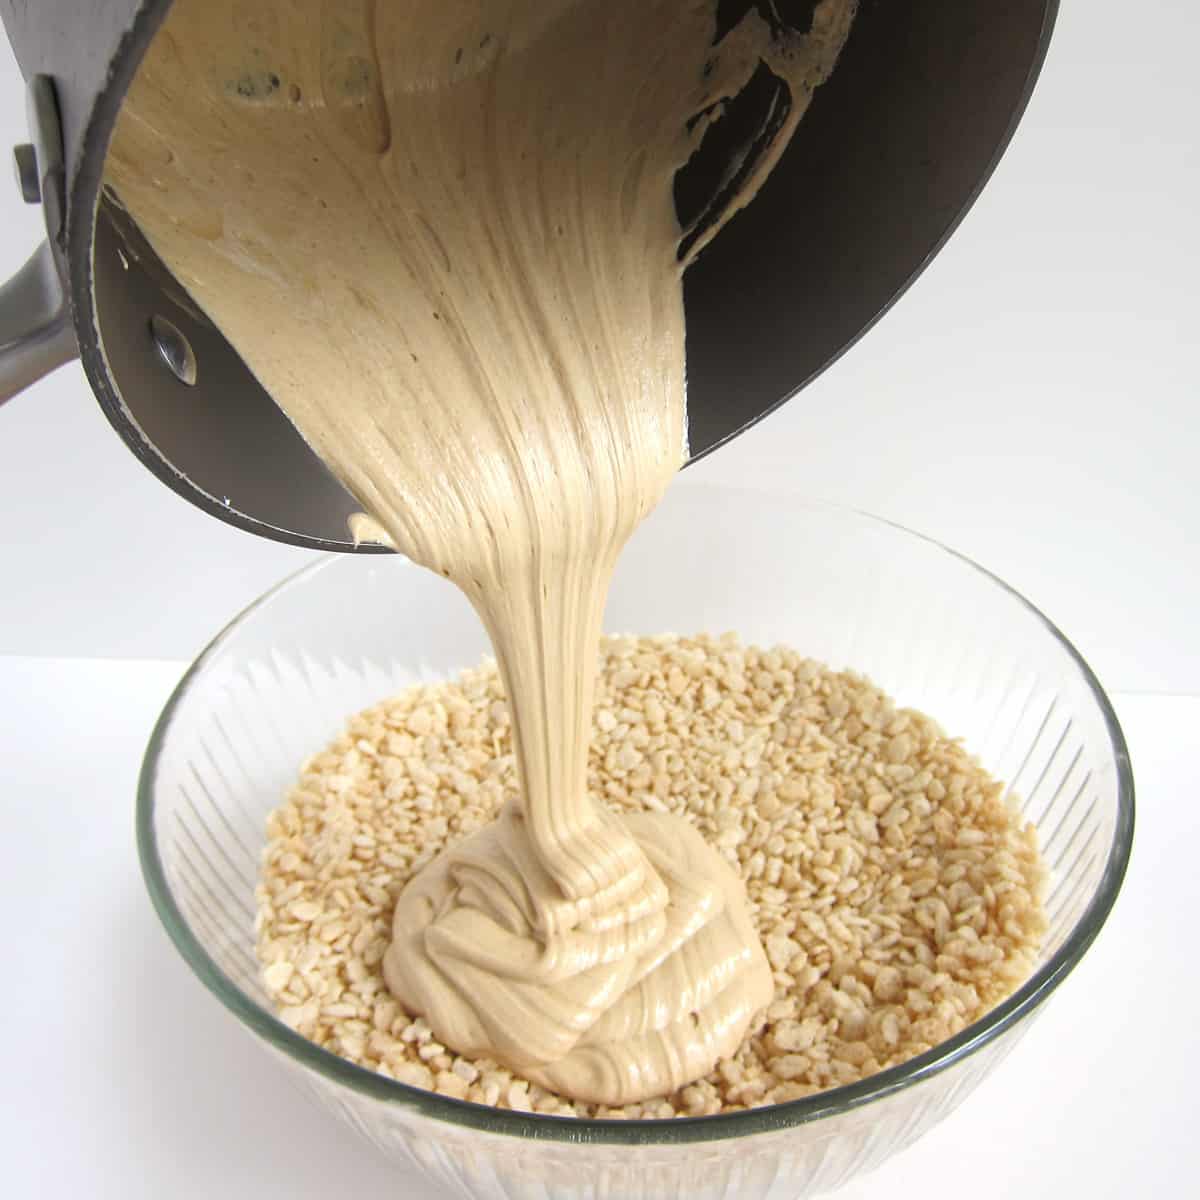 pouring the mixture of peanut butter, corn syrup, and marshmallow fluff over a bowl of Rice Krispie Treats cereal.